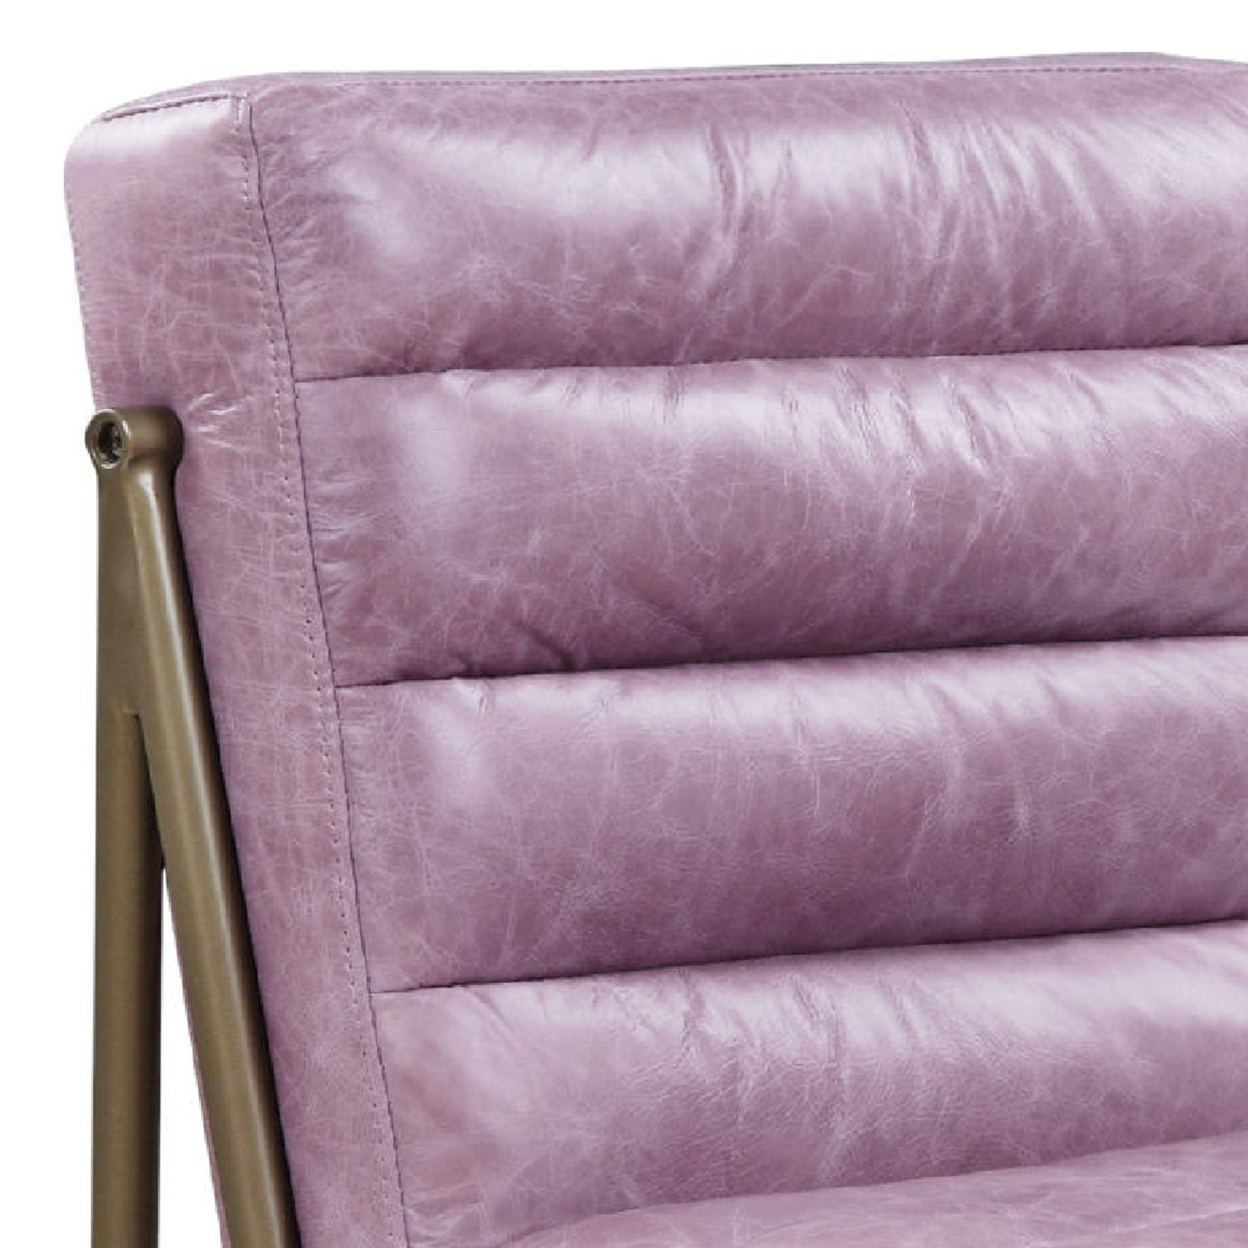 22 Inch Top Grain Leather Accent Chair, Metal Frame, Tufted Channel, Purple- Saltoro Sherpi